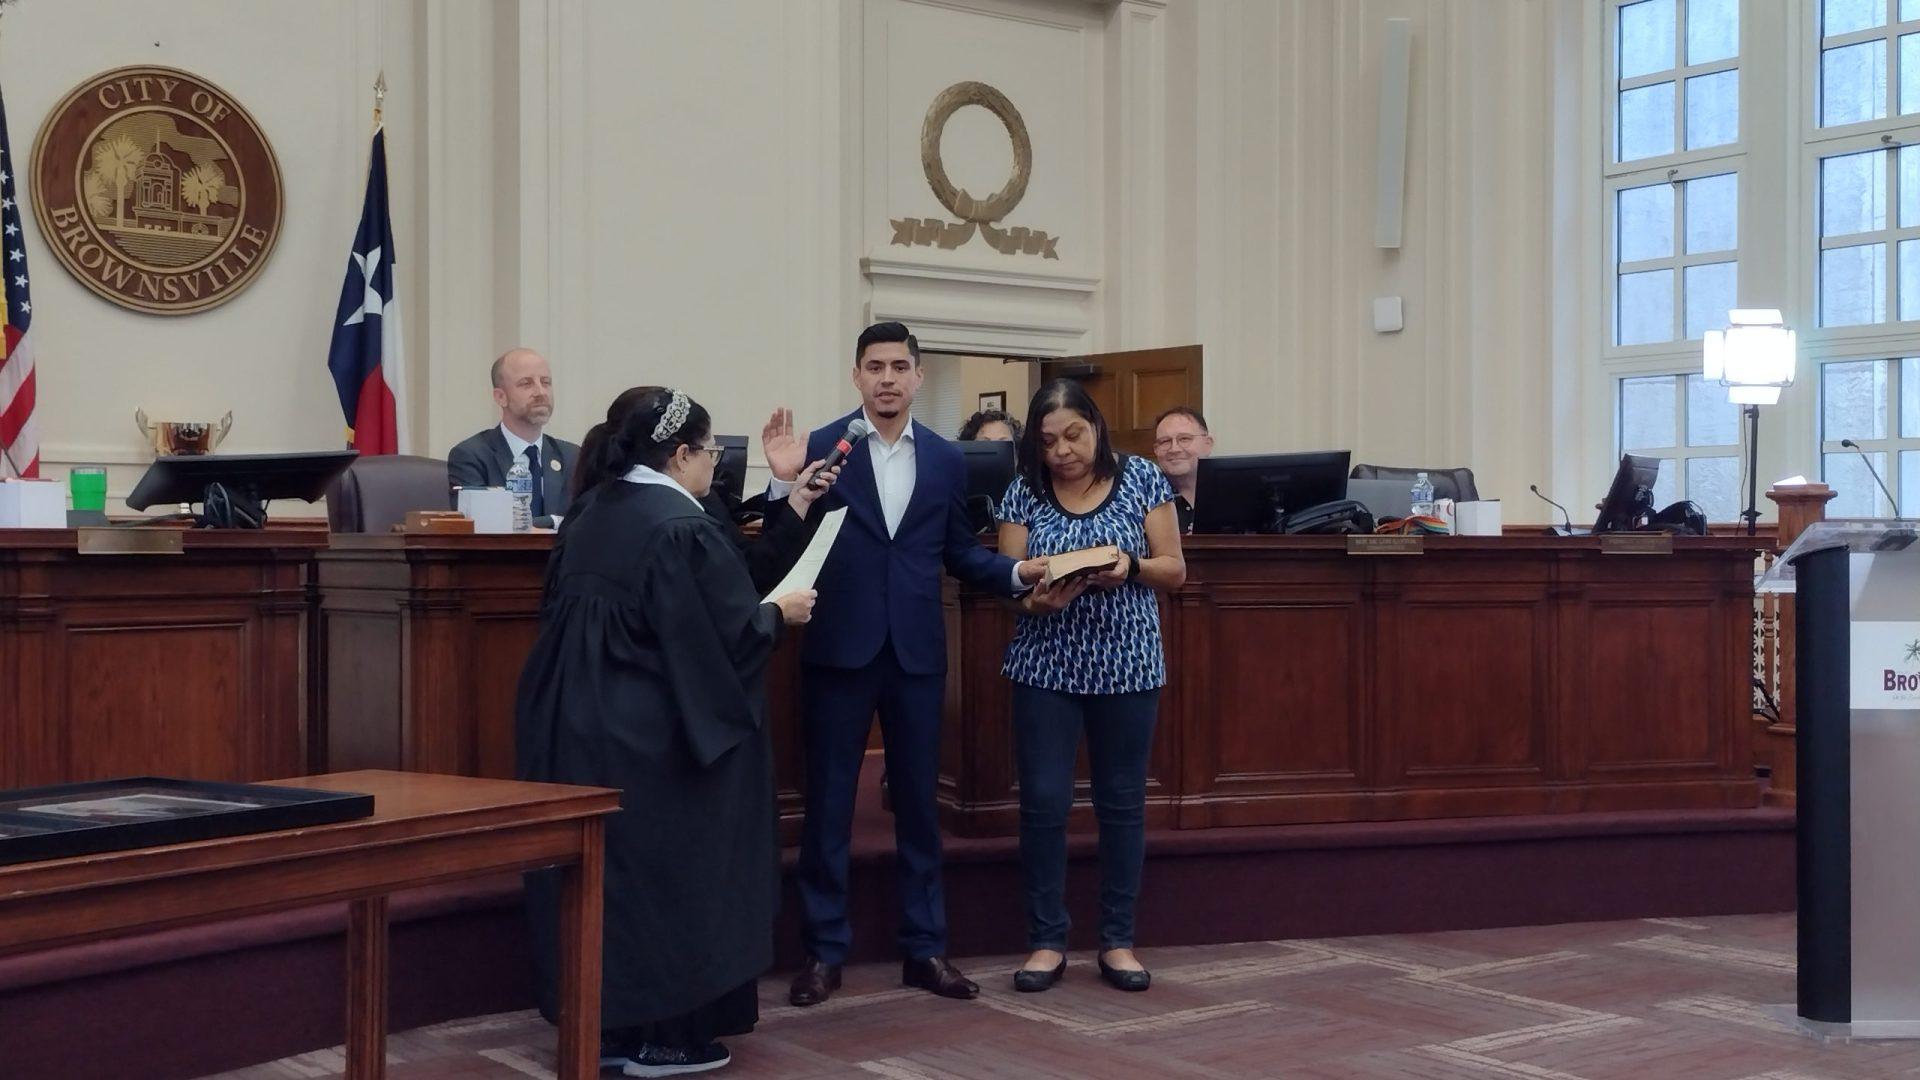 Brownsville’s newly elected mayor, commissioners take oath of office